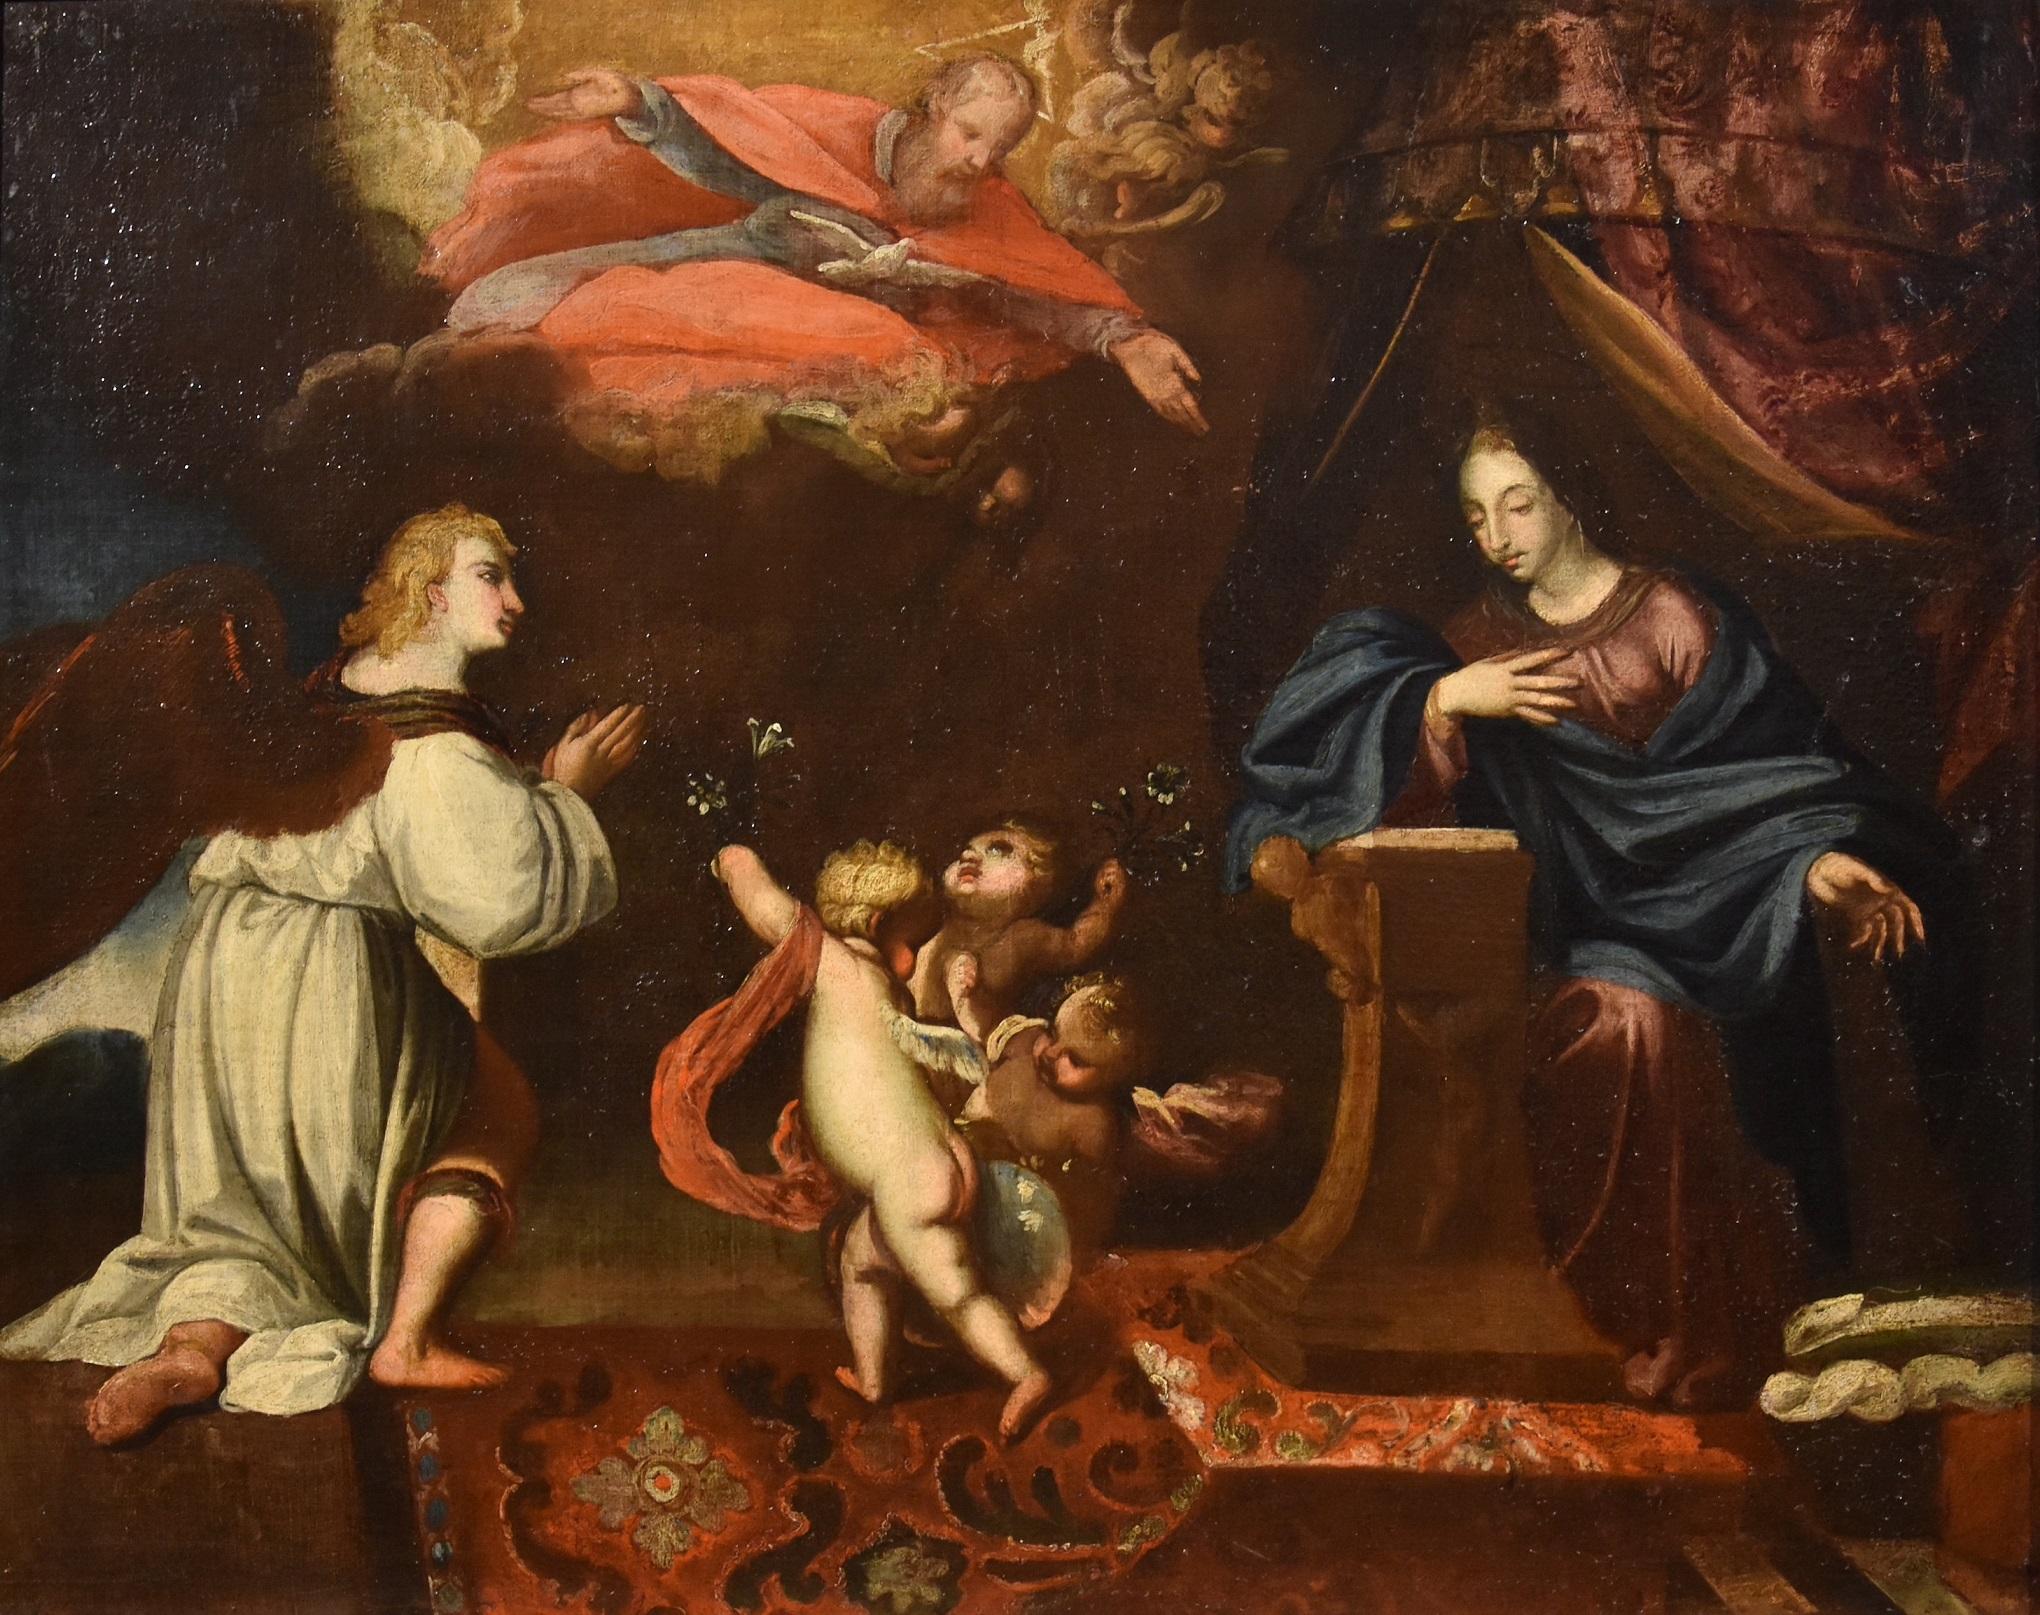 Annunciation Venetian 17th Century Paint Oil on canvas Old master Religious Art - Painting by Venetian school of the seventeenth century